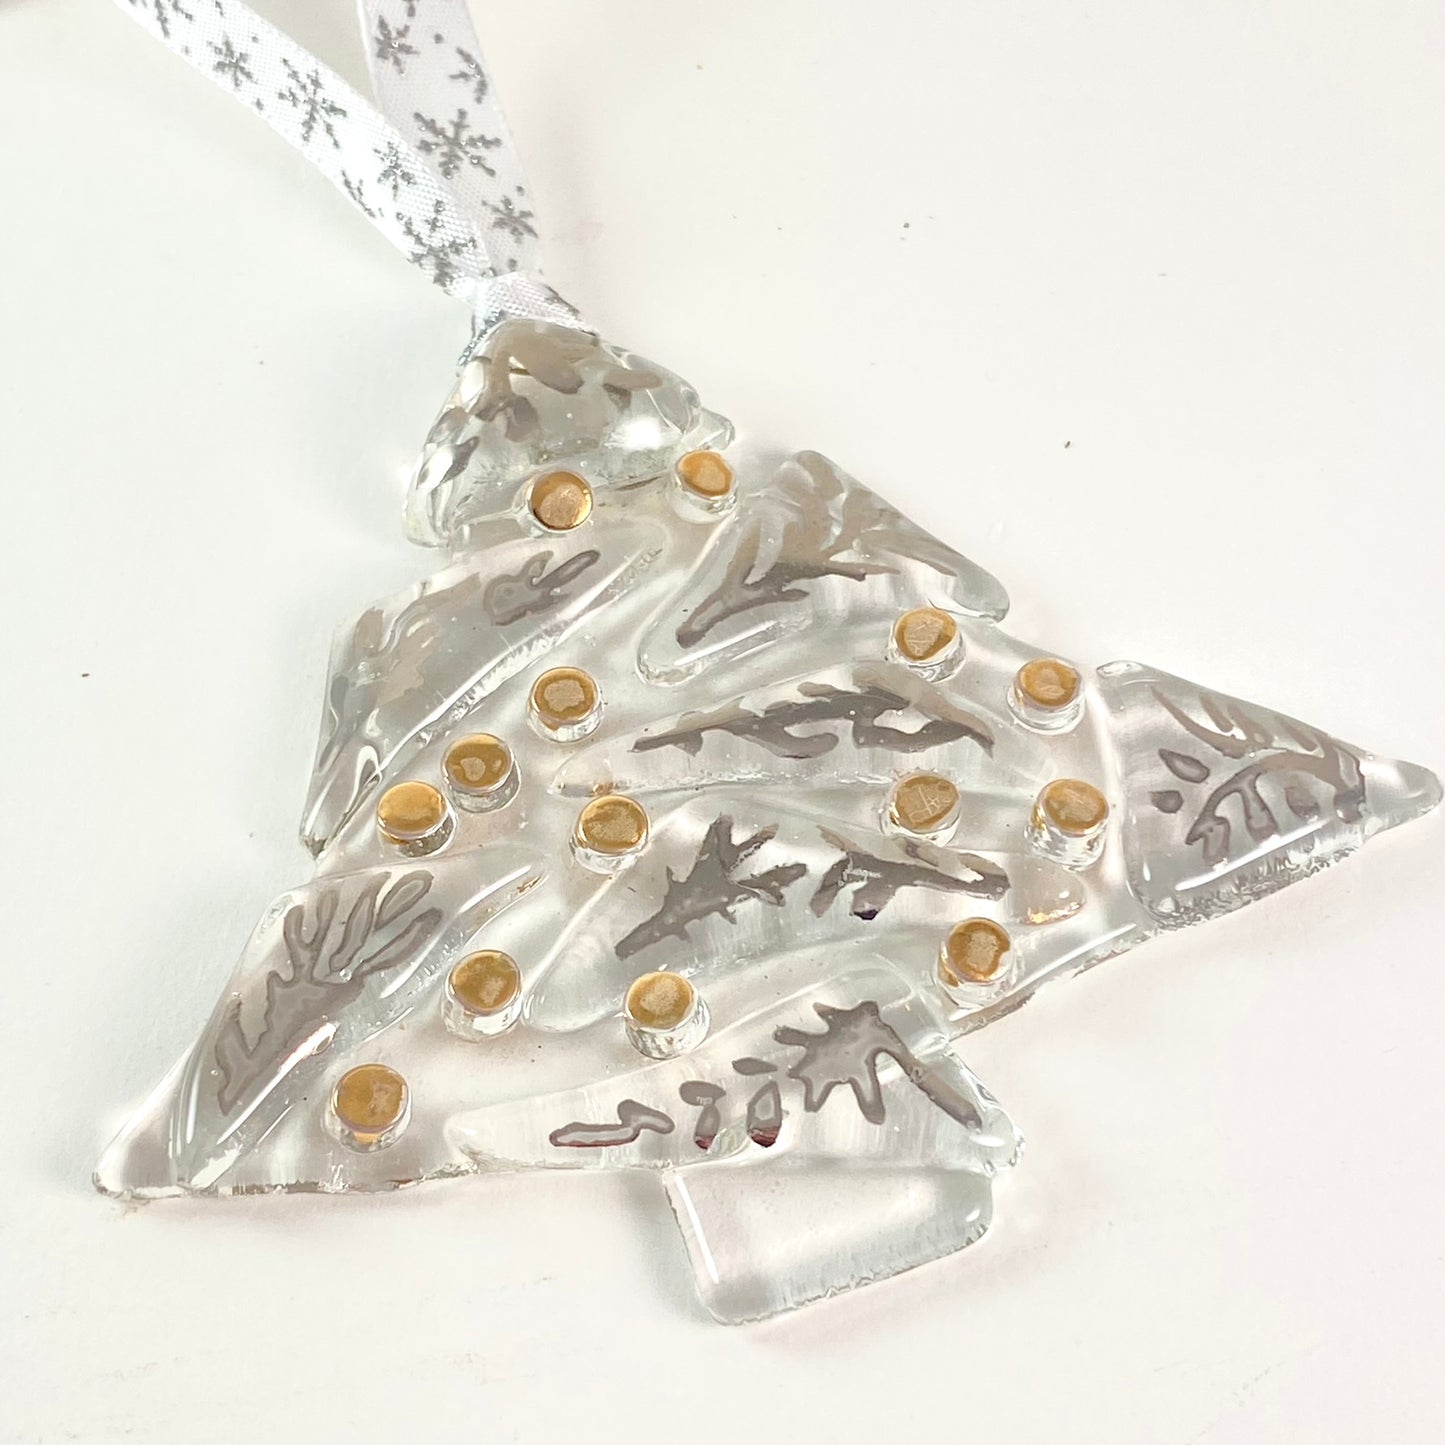 Abstract Tree Clear Ornament 11b Silver and Gold Luster